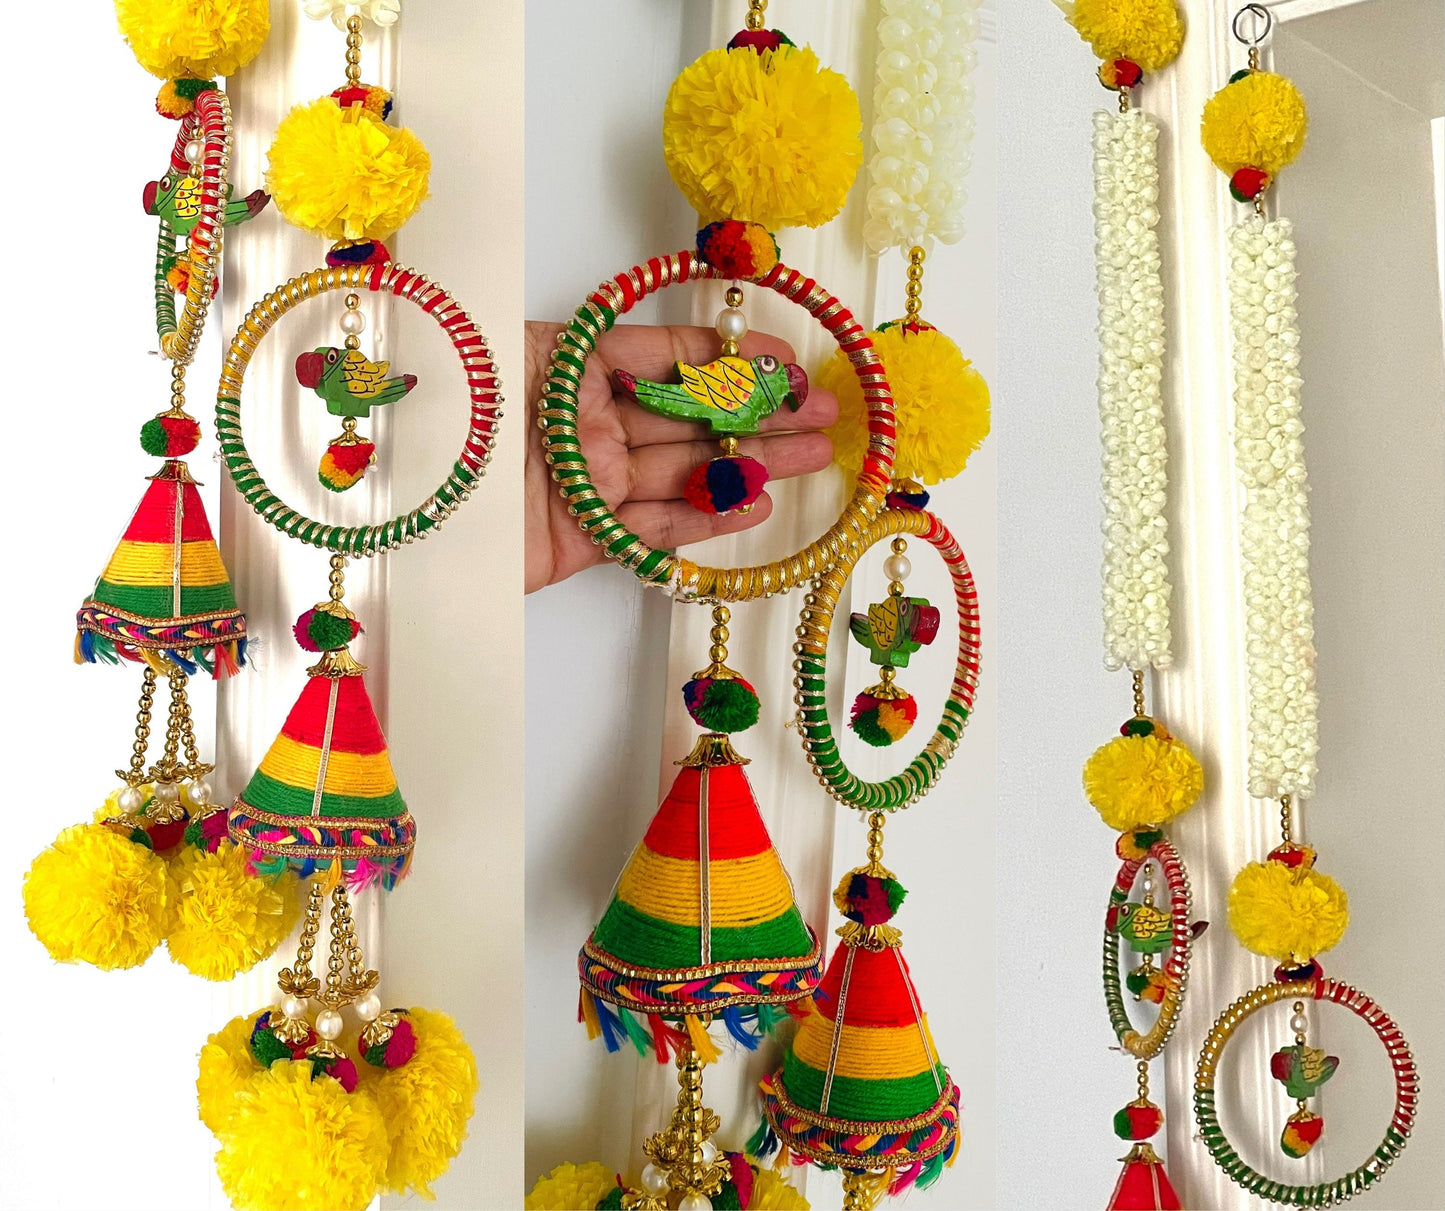 Pair of Parrot Mithoo Door Hanging Strings for Diwali Decoration Outdoor Backdrops Event Weddings Home Decor New Home